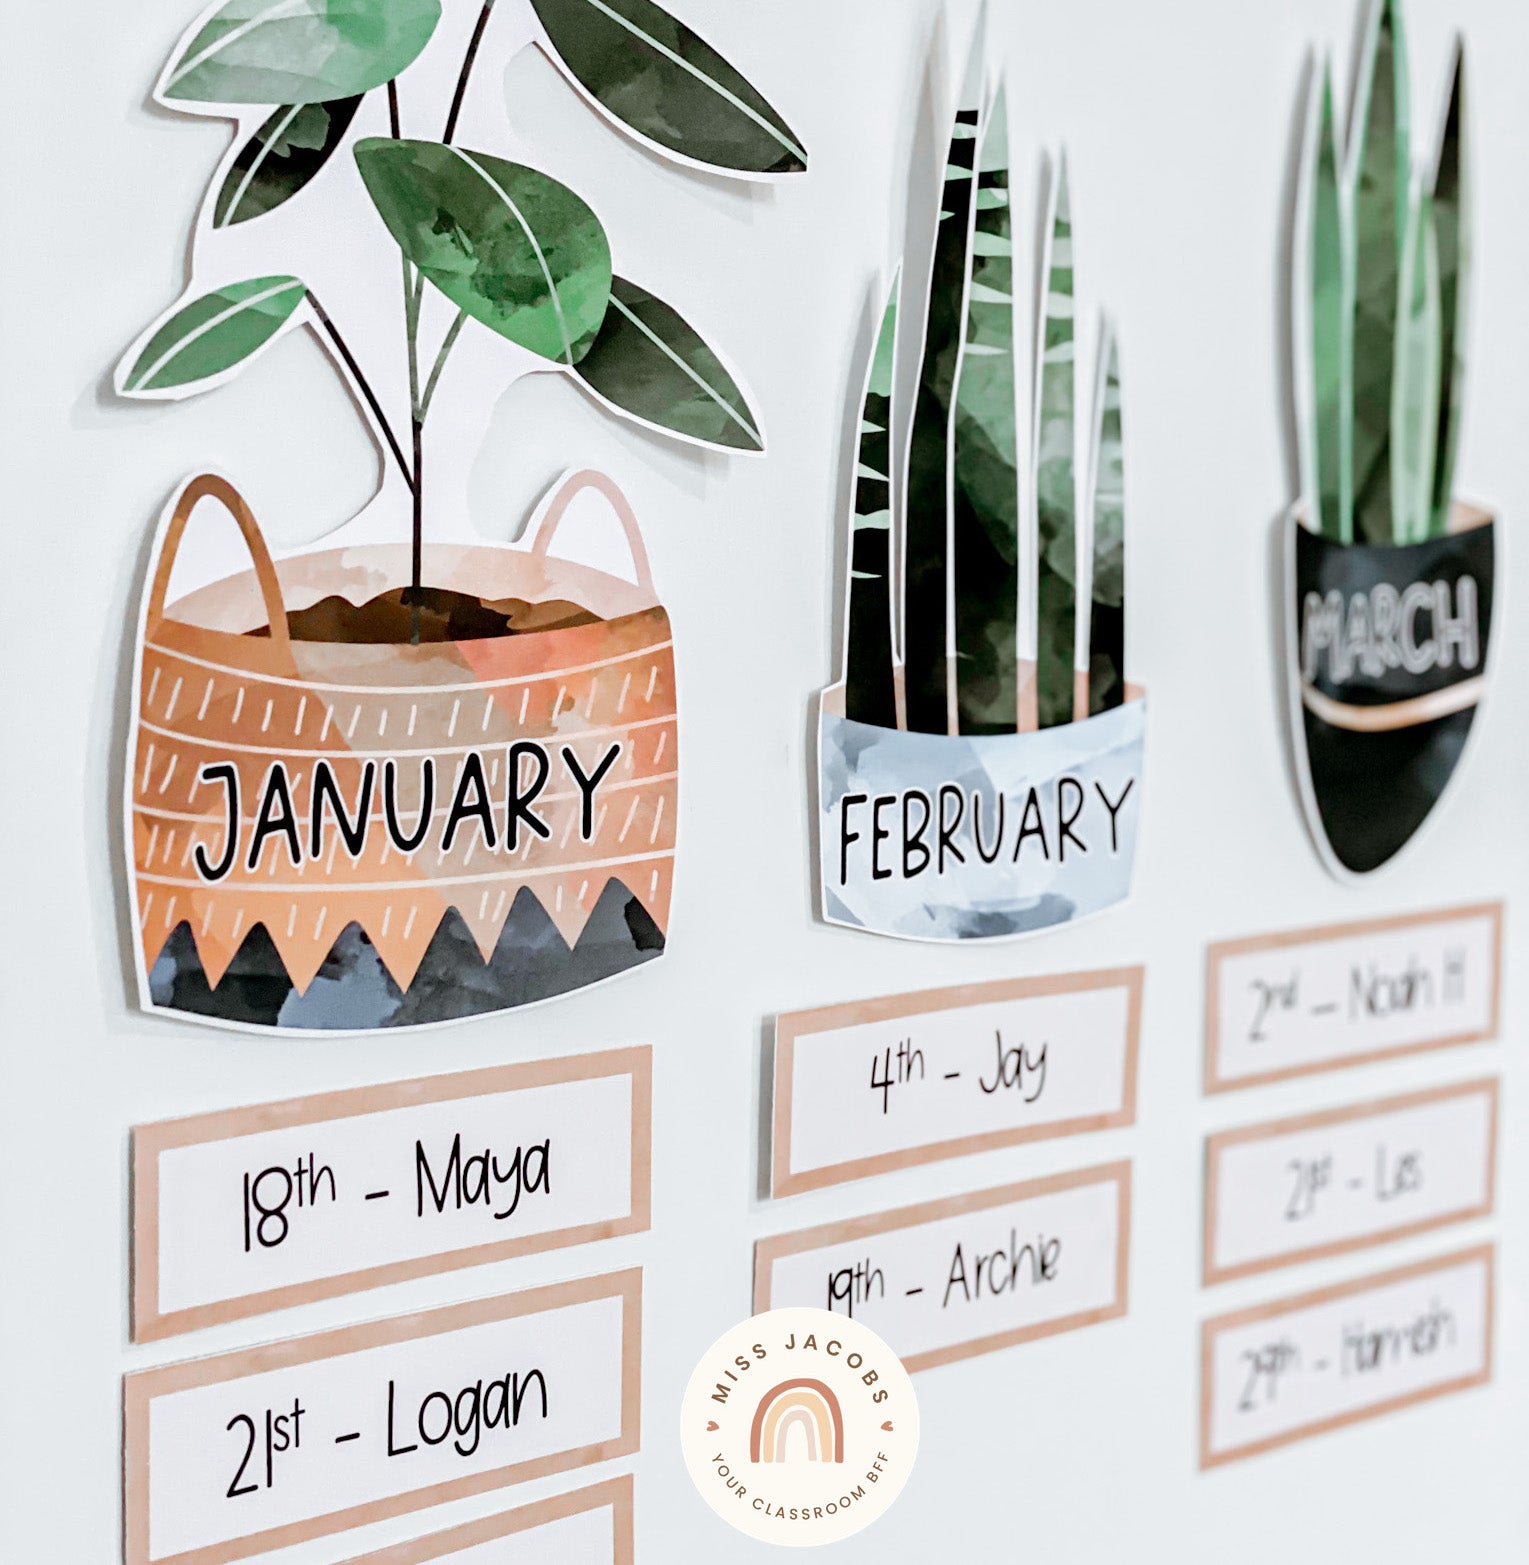 Two images show the ‘Our Birthdays’ display. The months of the year are depicted on illustrations of plants, and underneath students’ names and birthdays are displayed on rectangular labels. The color palette includes earthy tones and beautiful blues.